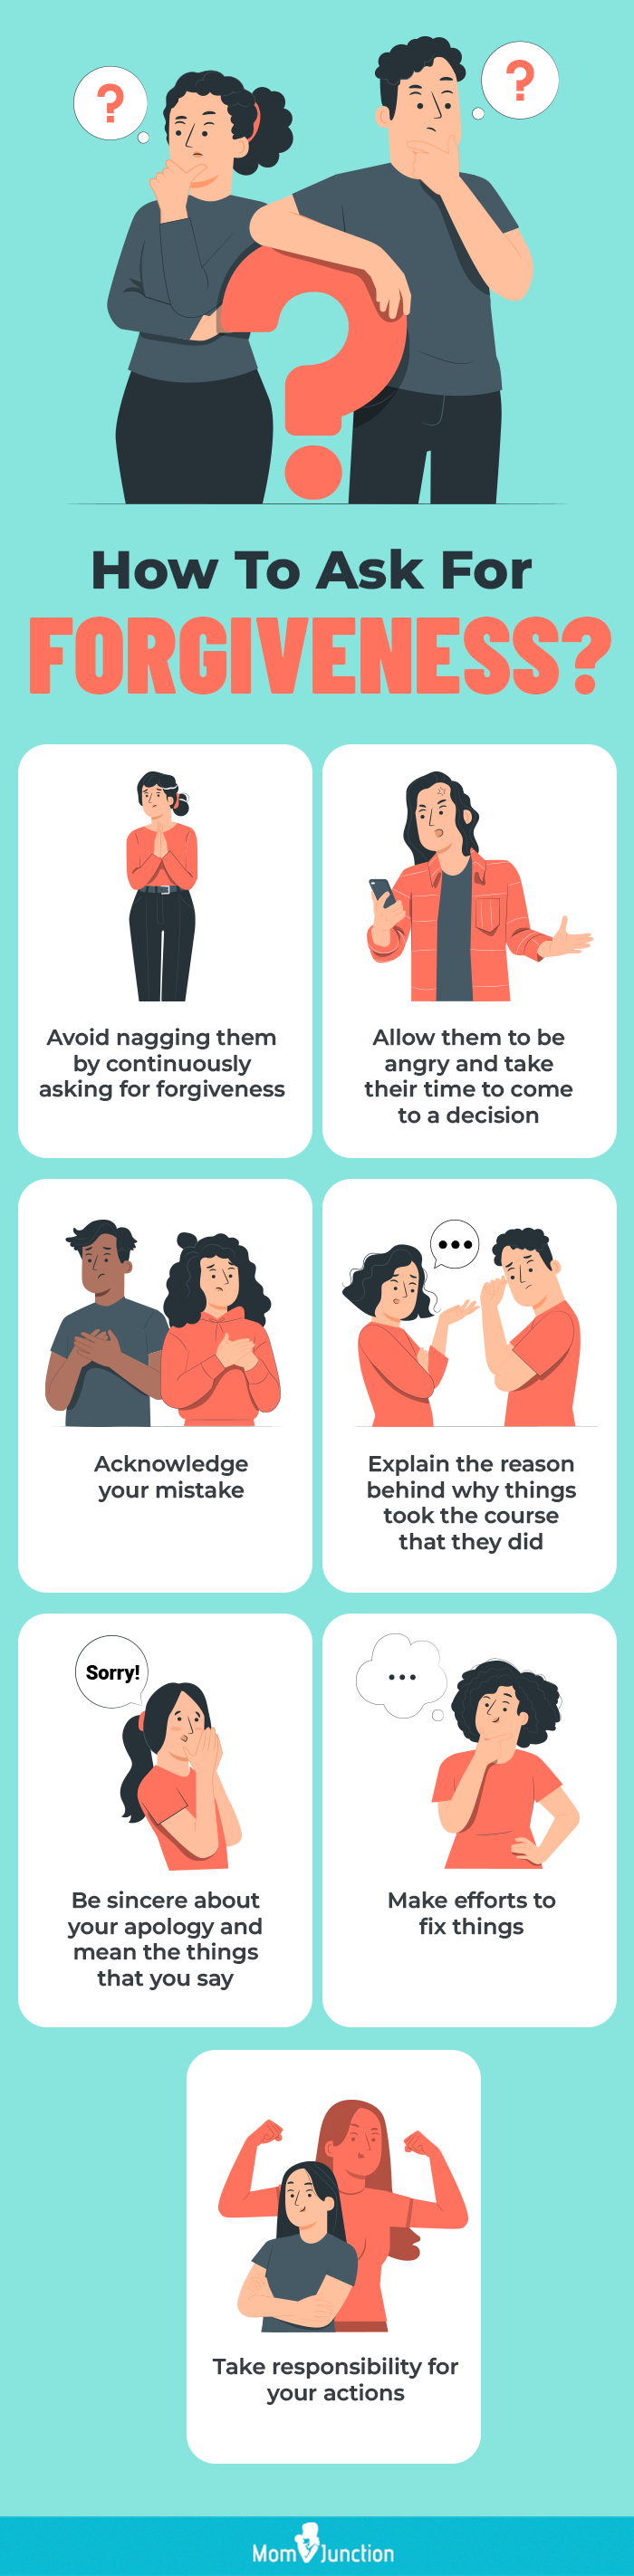 how to ask for forgiveness (infographic)